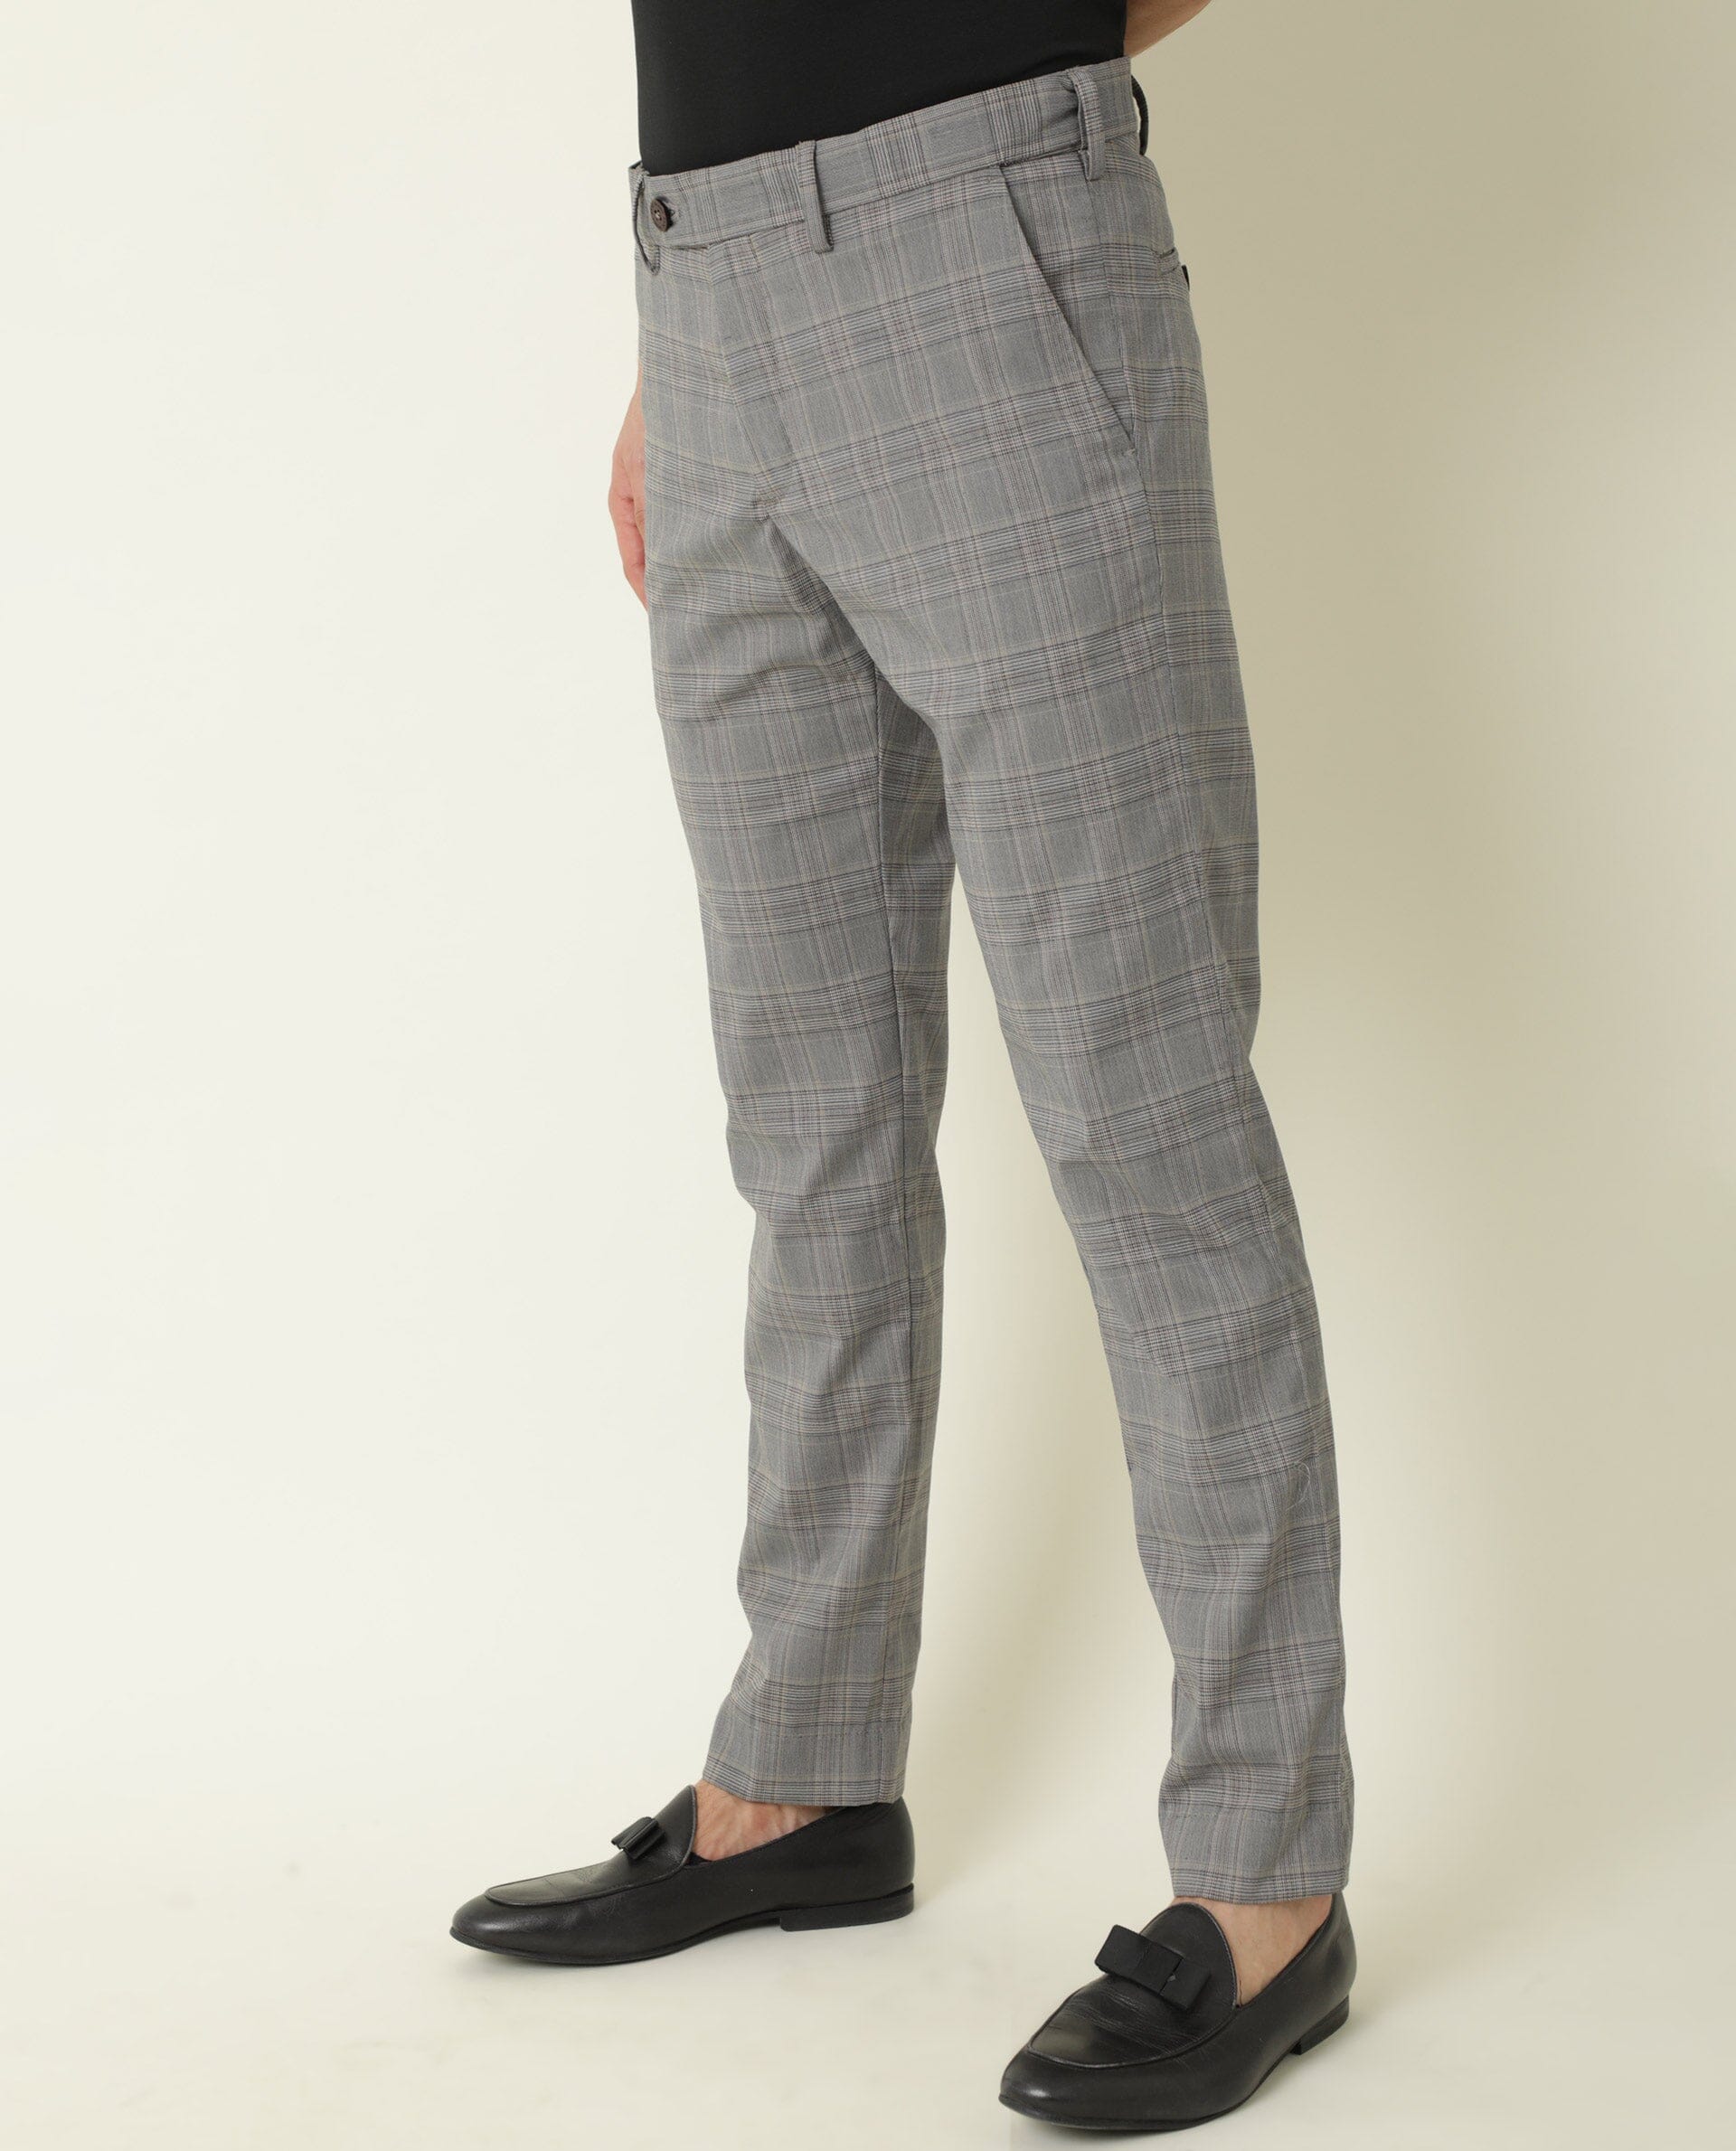 Buy Louis Philippe Grey Trousers Online  782390  Louis Philippe